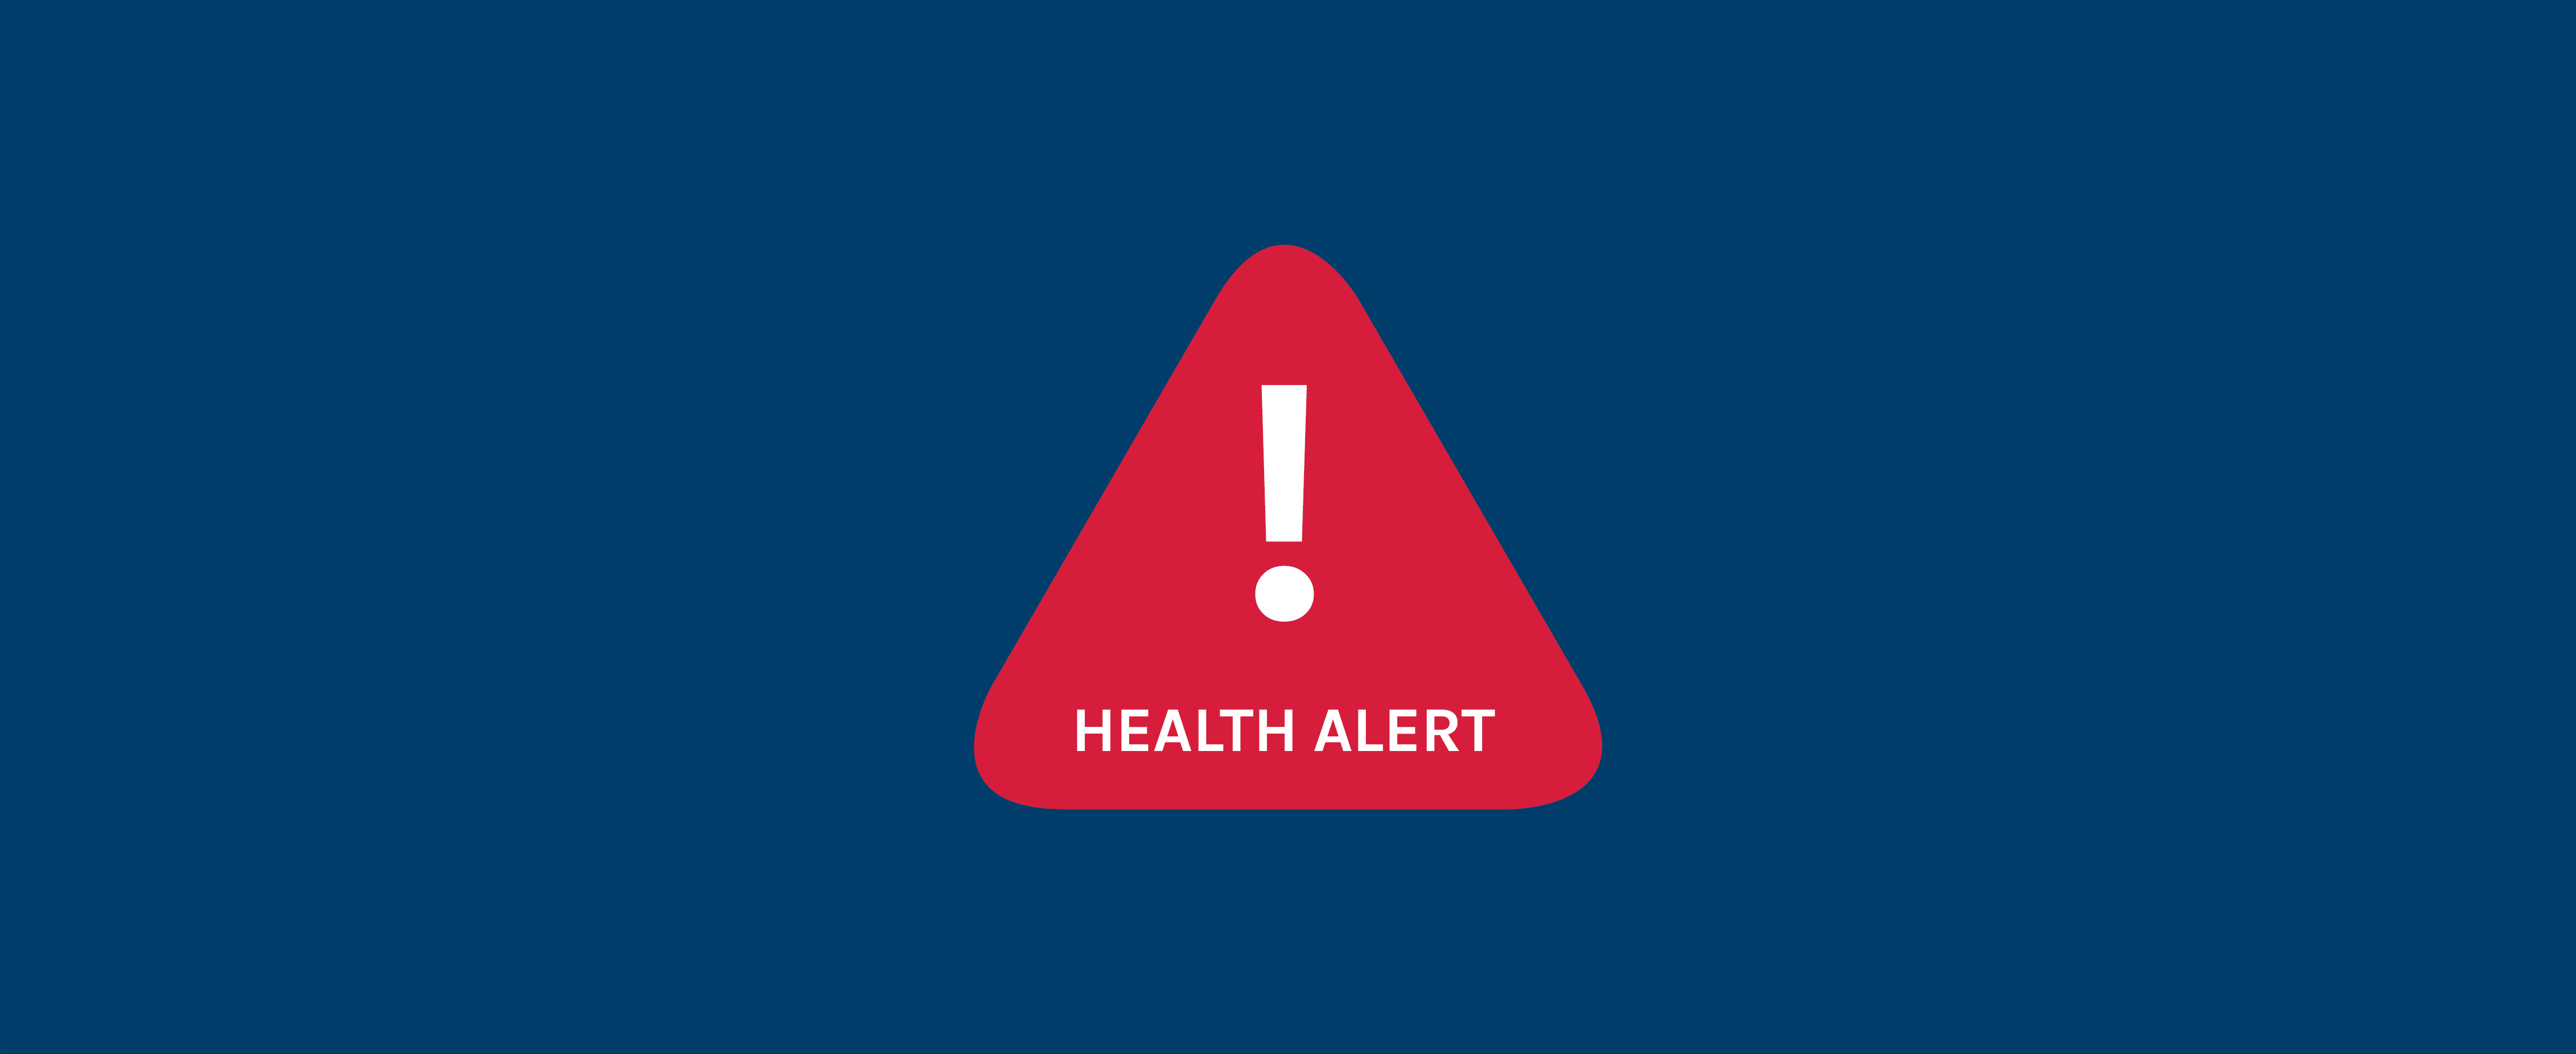 CHO Alert: Health concerns related to Victorian bushfires